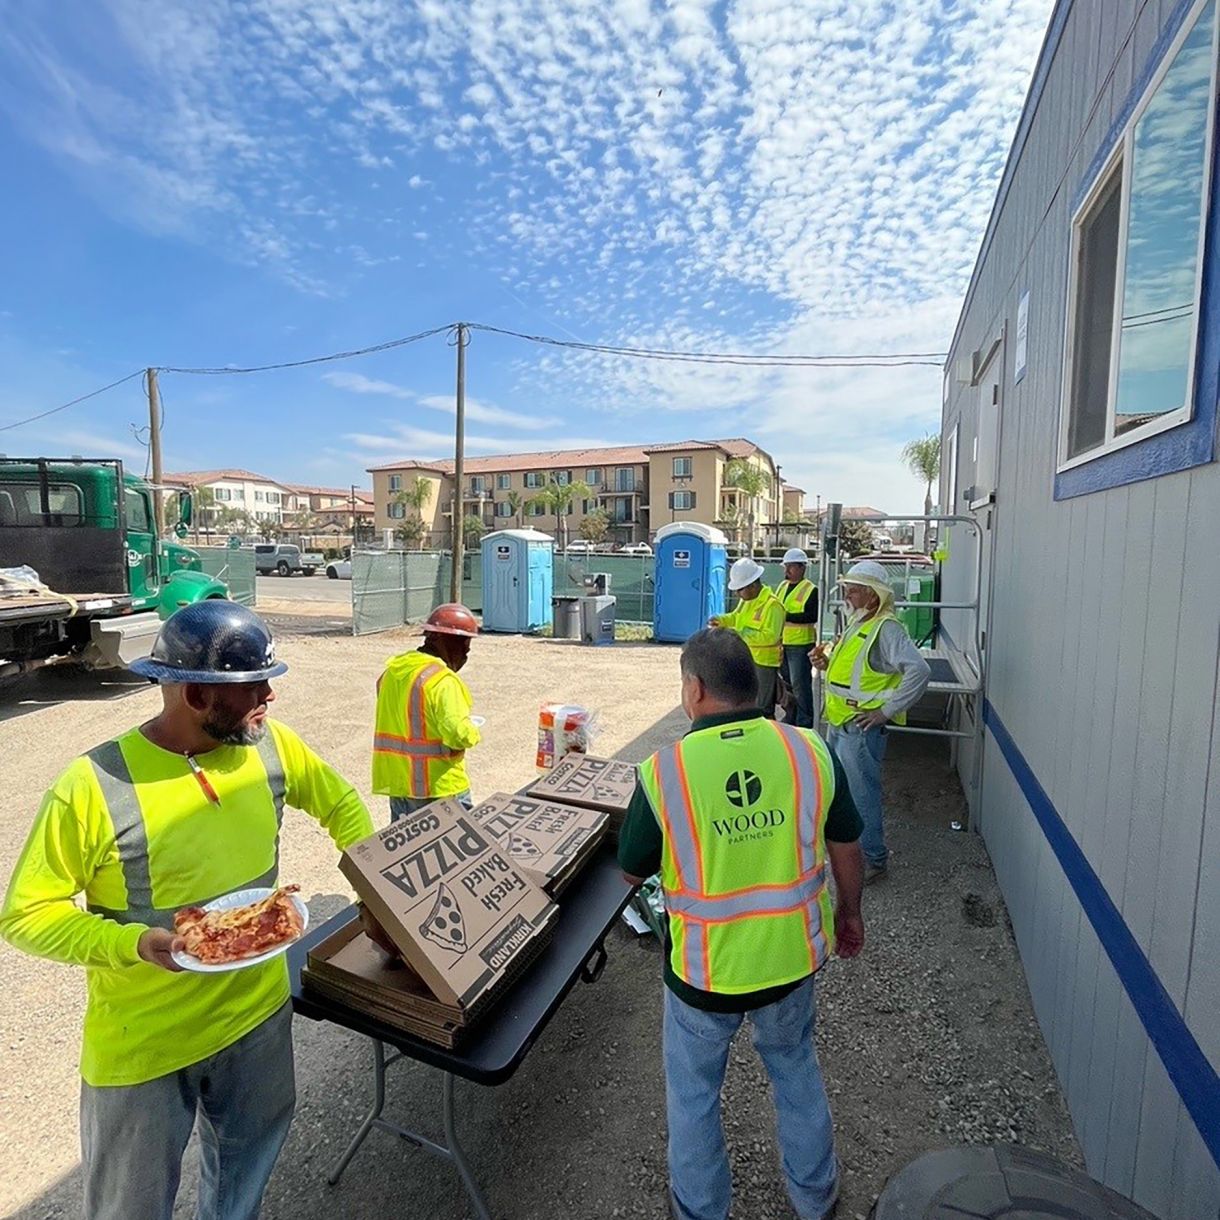 Construction workers eating pizza from pizza boxes at construction site